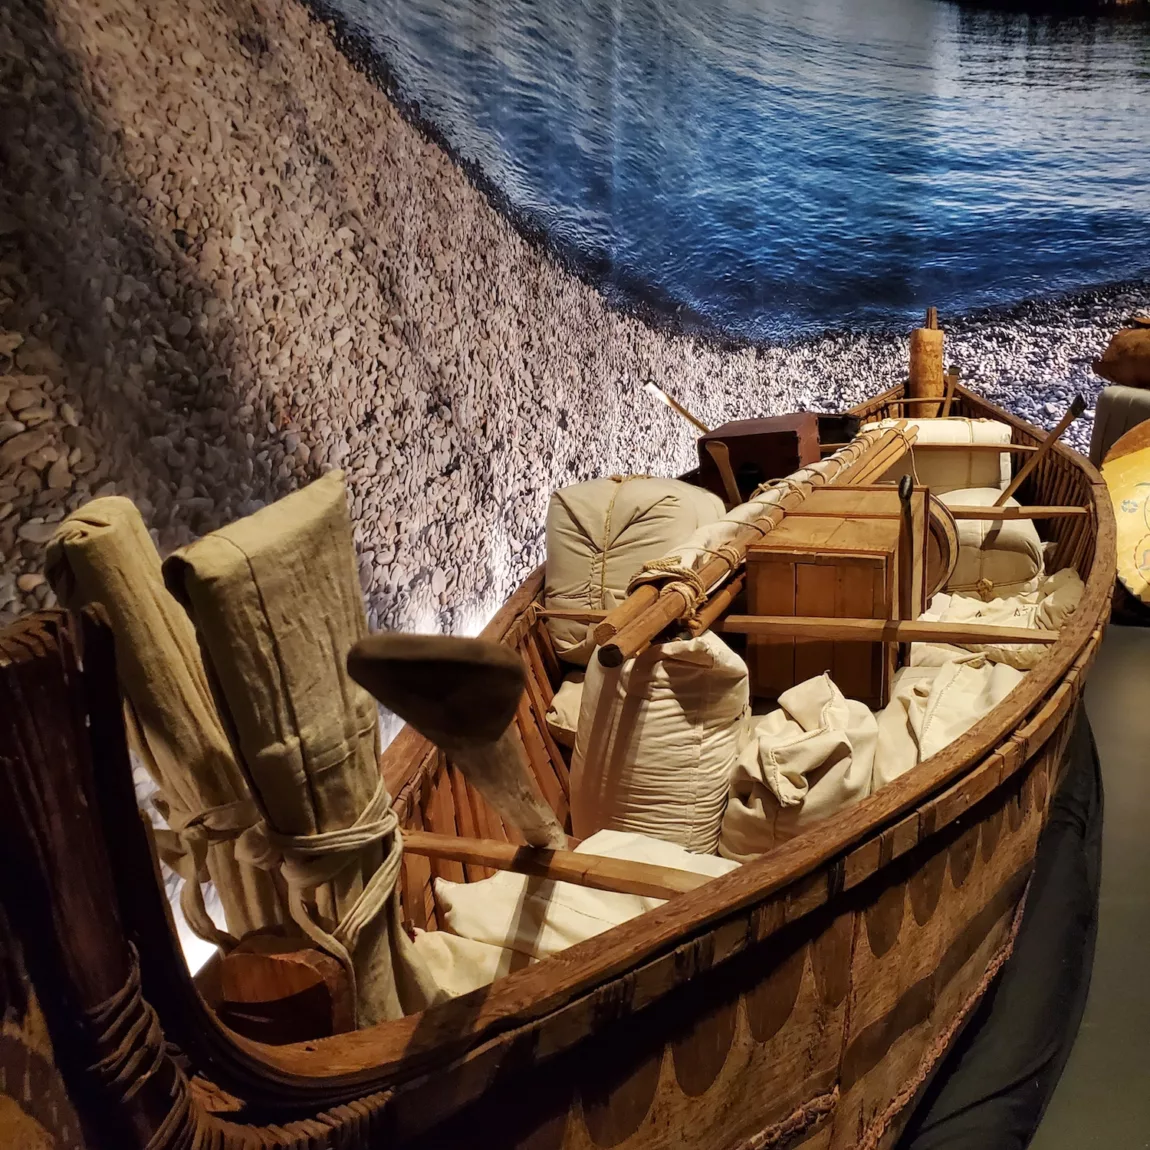 An old canoe used by Indigenous people at the Canadian Canoe Museum 